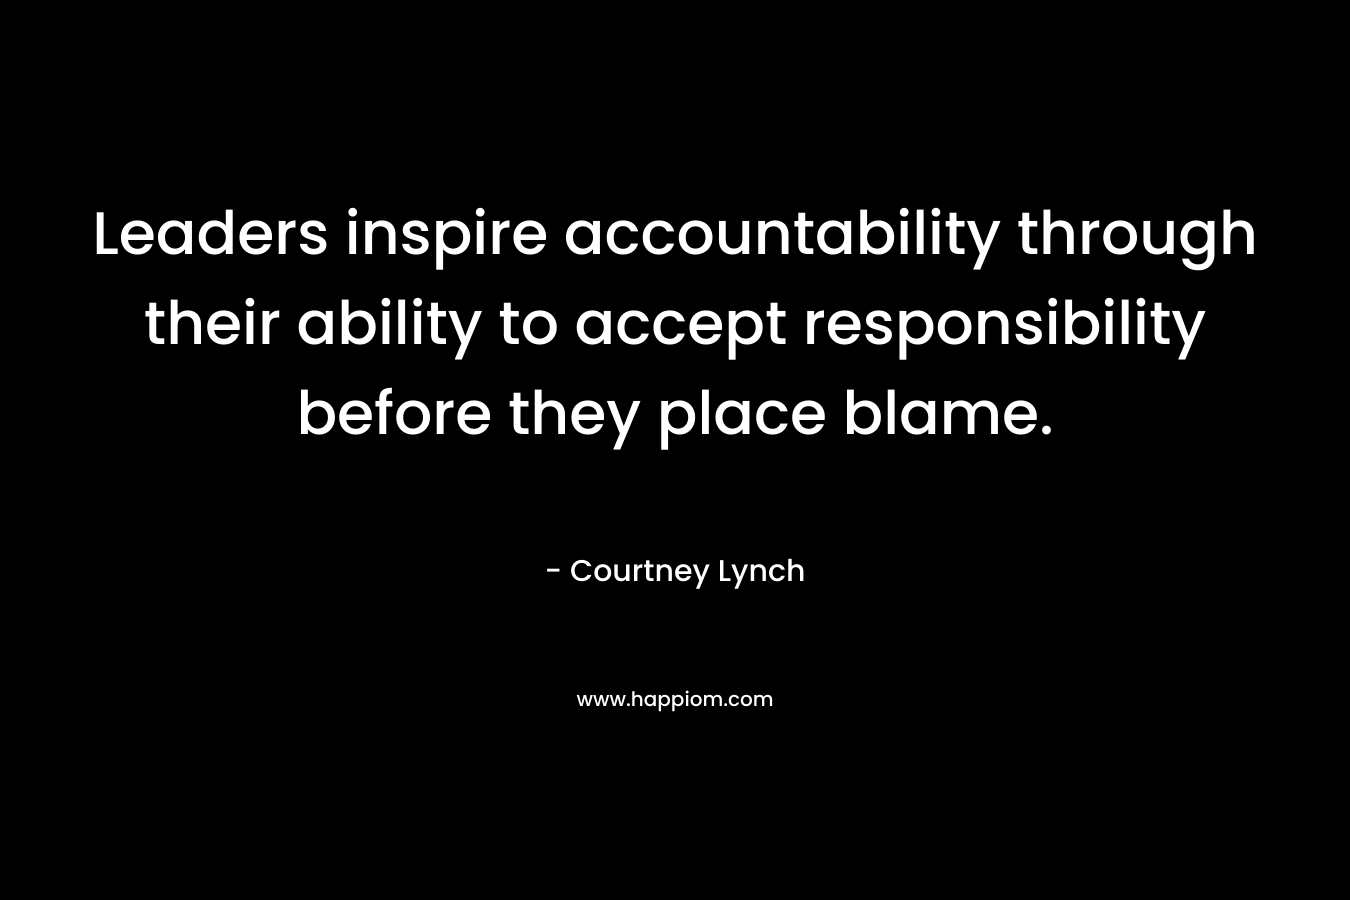 Leaders inspire accountability through their ability to accept responsibility before they place blame.